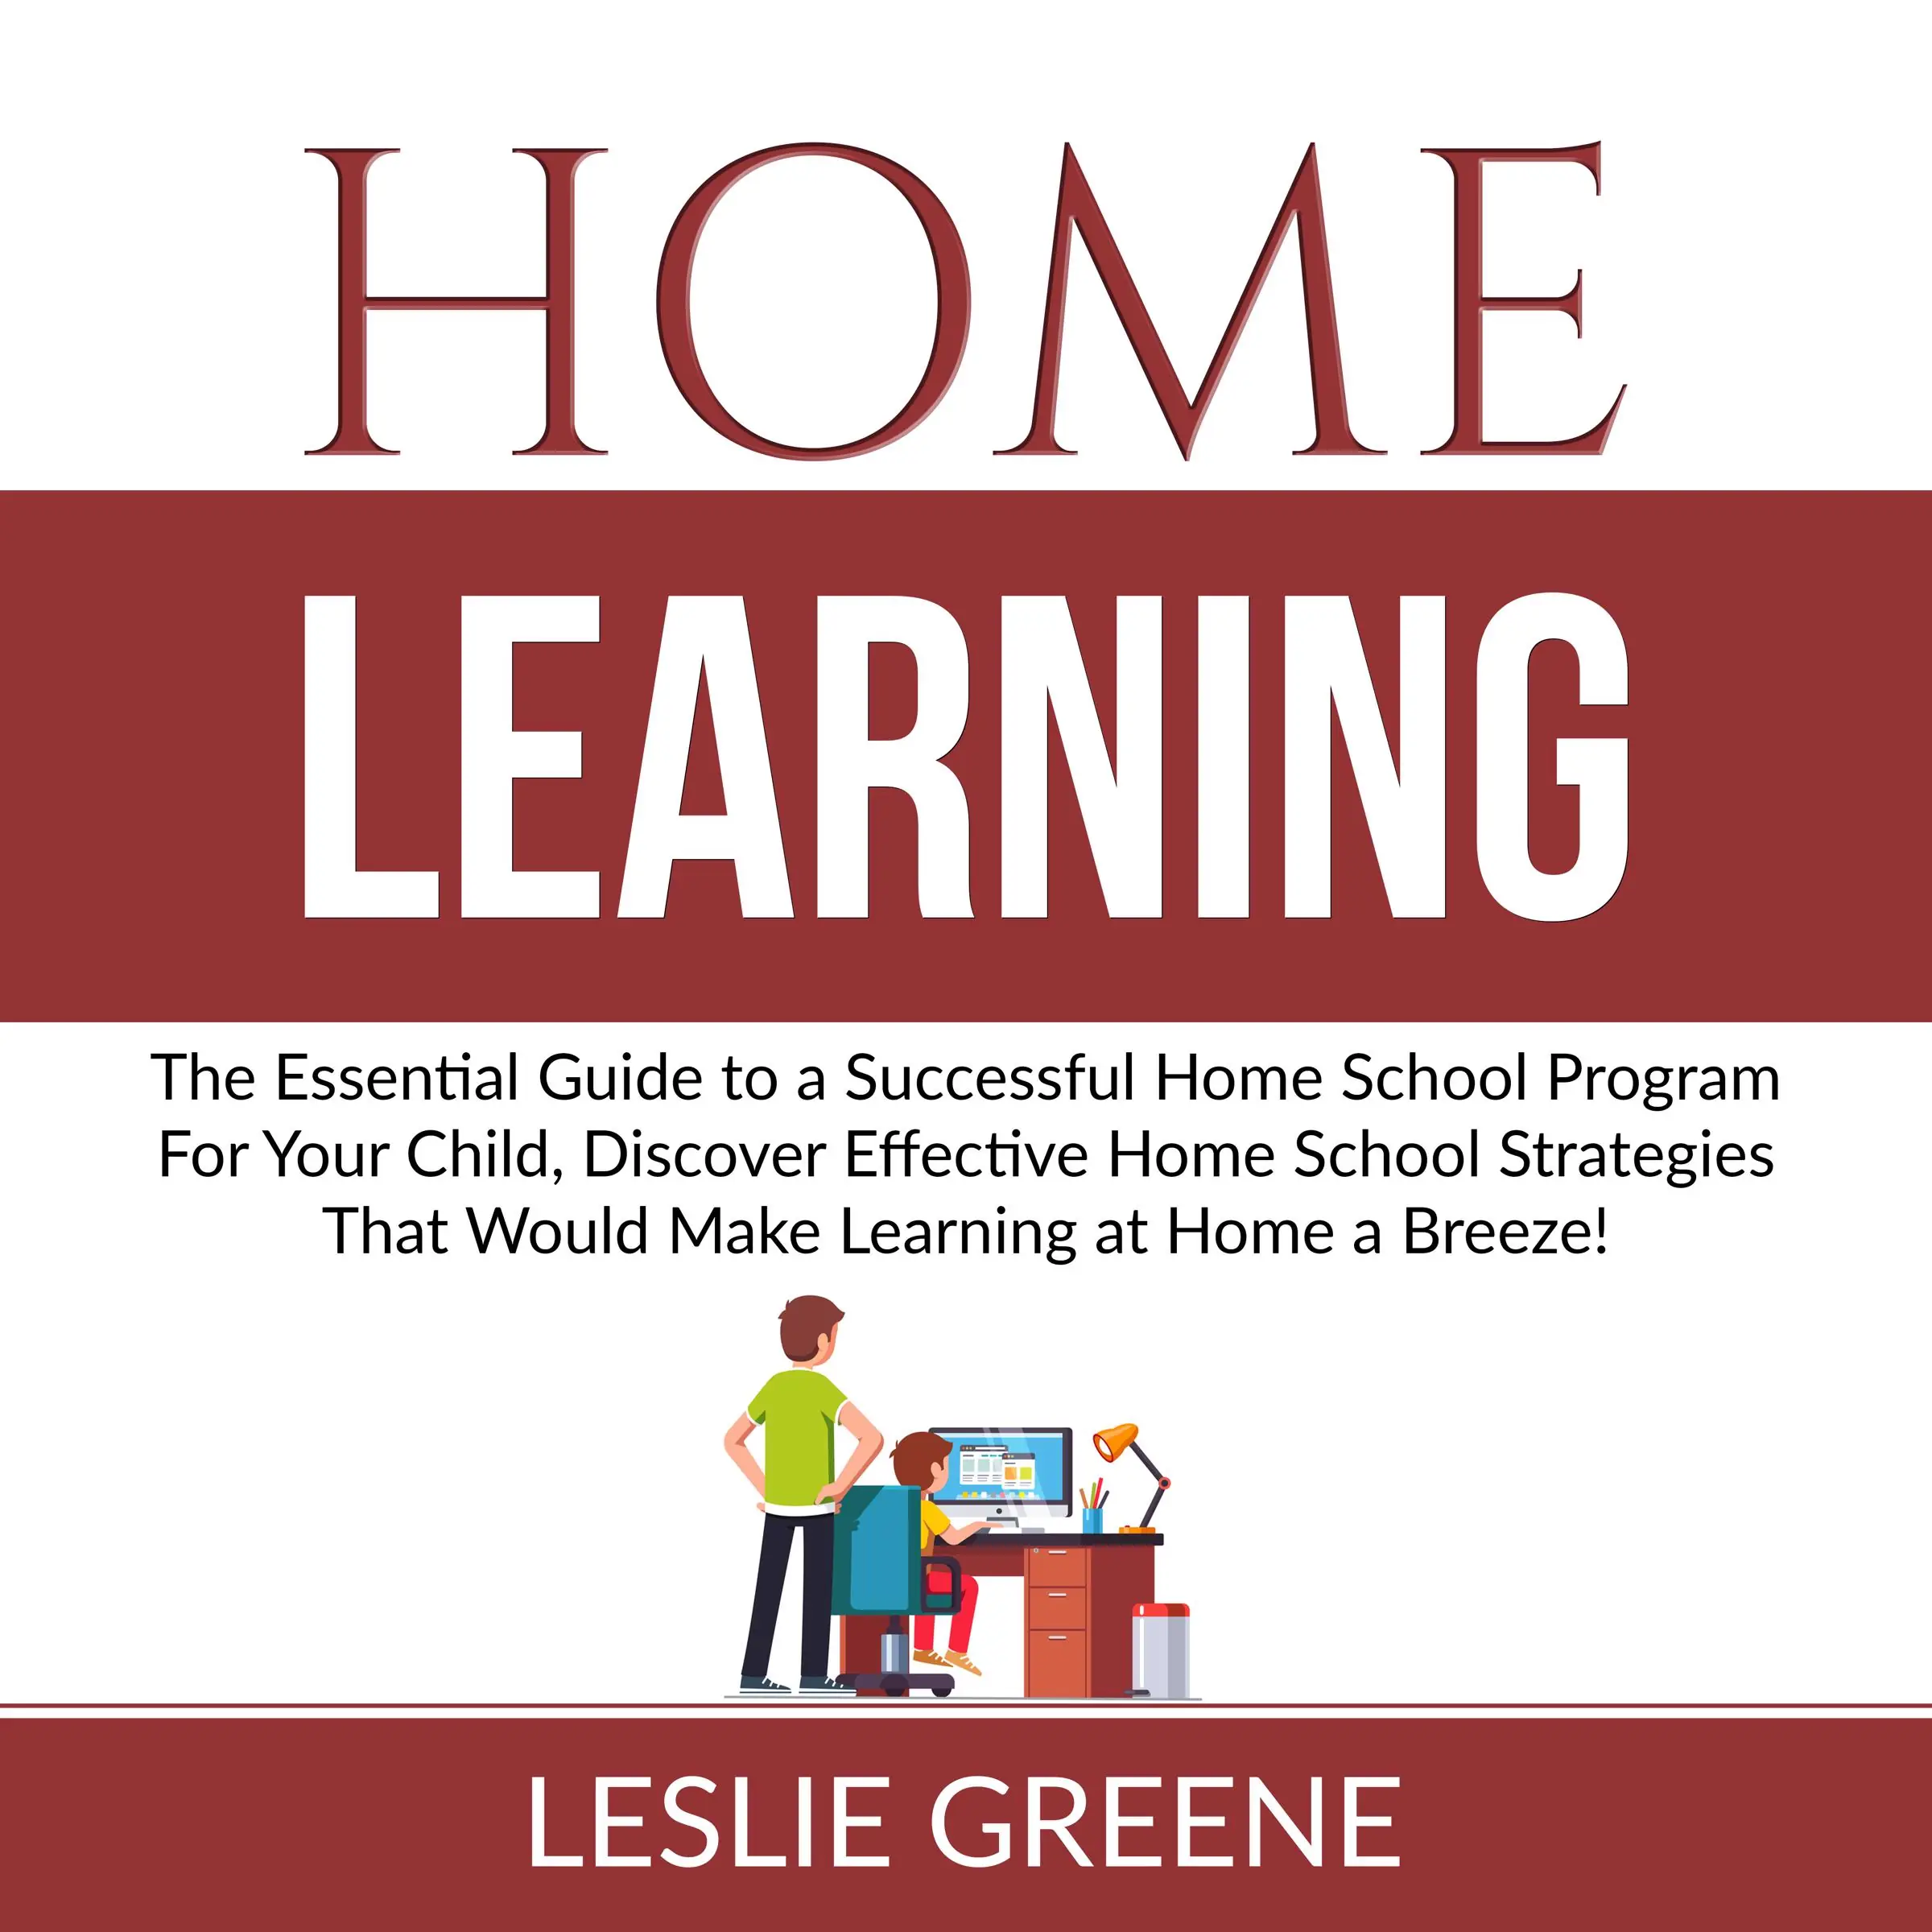 Home Learning: The Essential Guide to a Successful Home School Program For Your Child, Discover Effective Home School Strategies That Would Make Learning at Home a Breeze! Audiobook by Leslie Greene